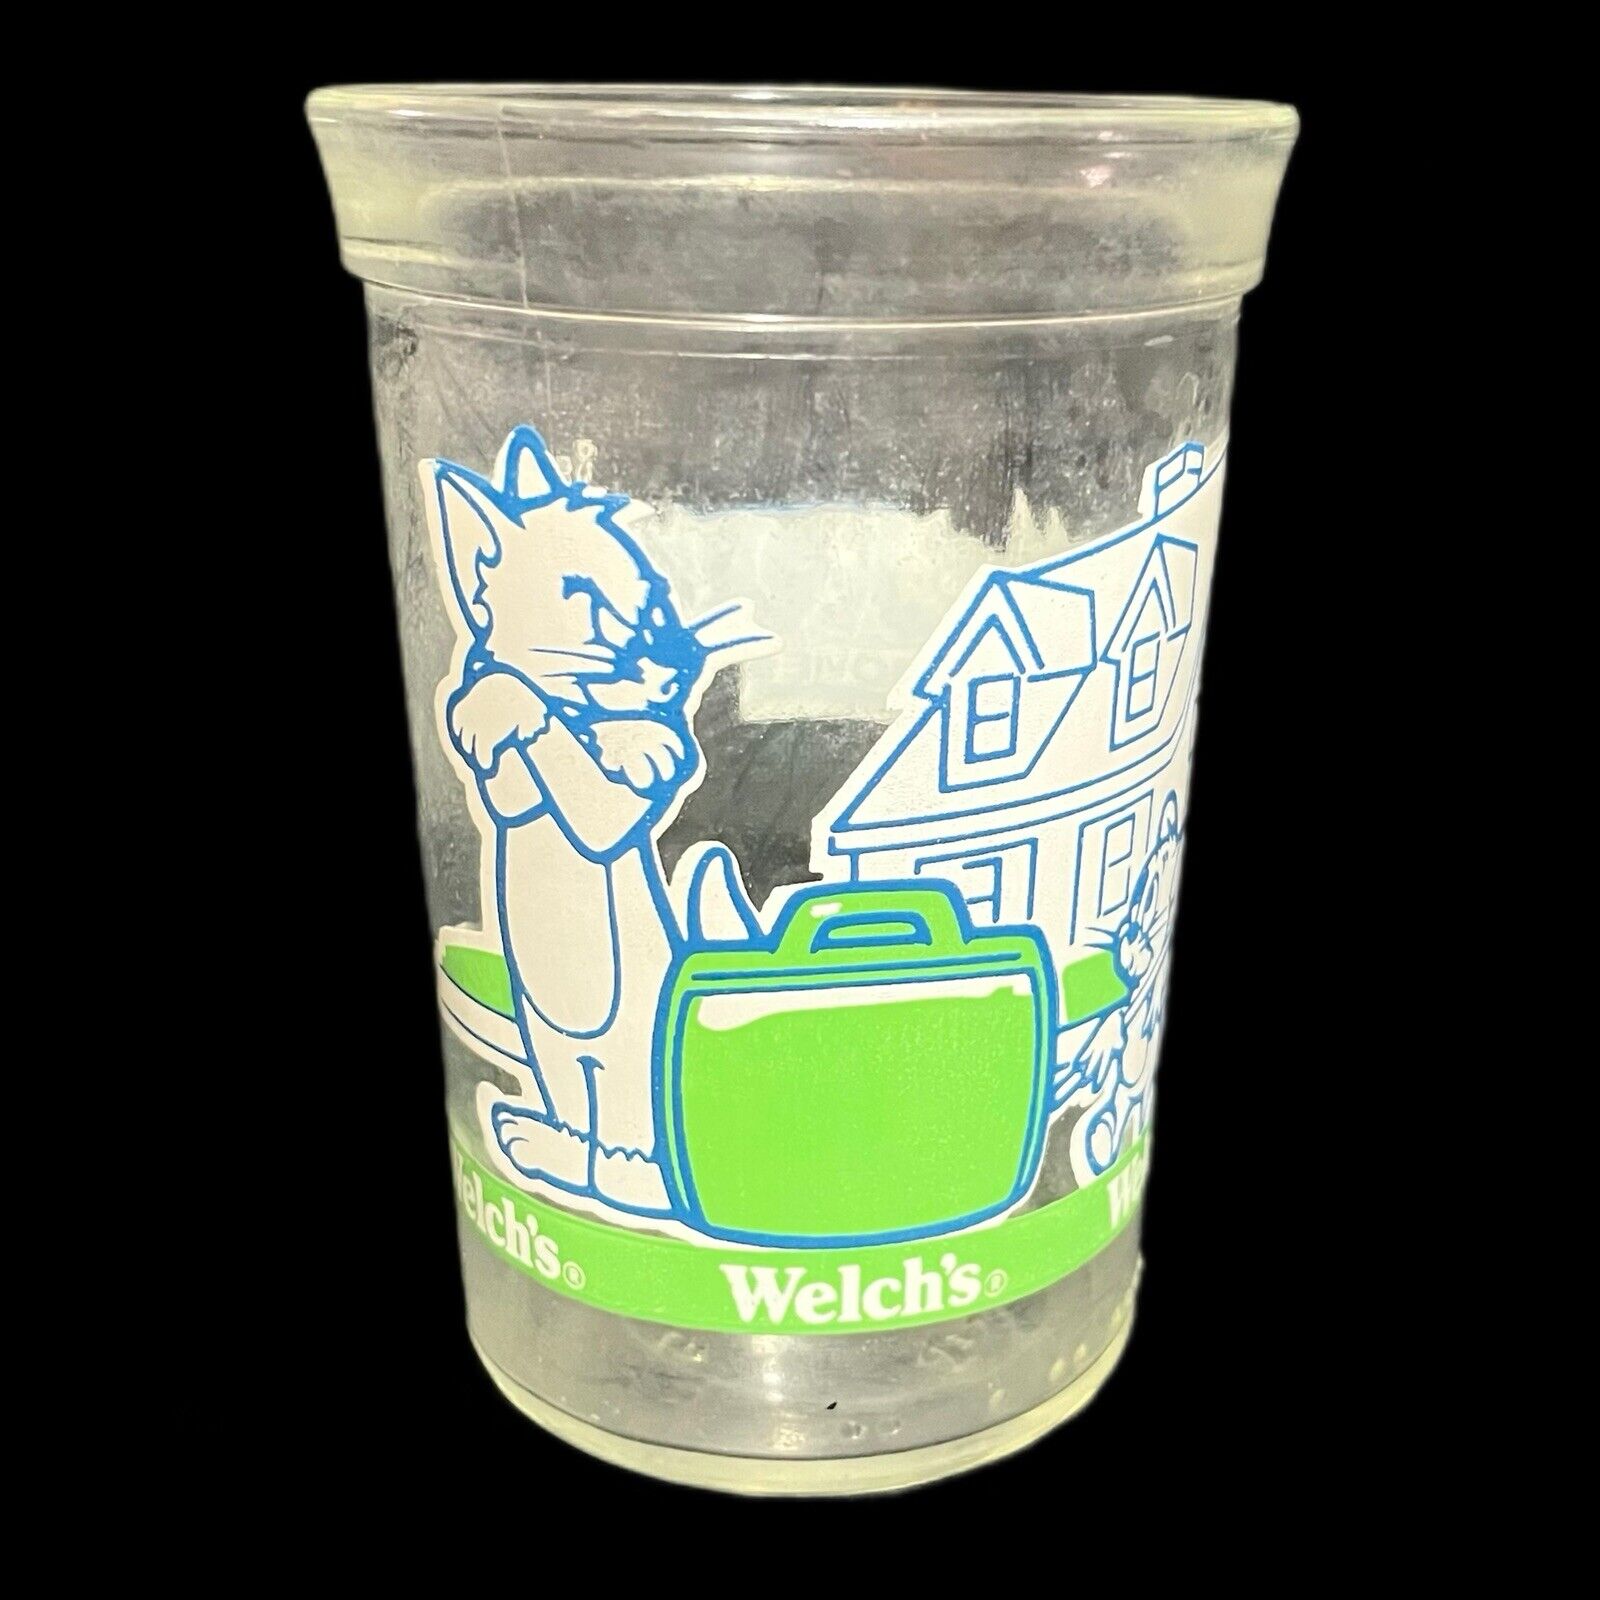 Vintage Welch's Jelly Jar Glass - Tom And Jerry The Movie 1993